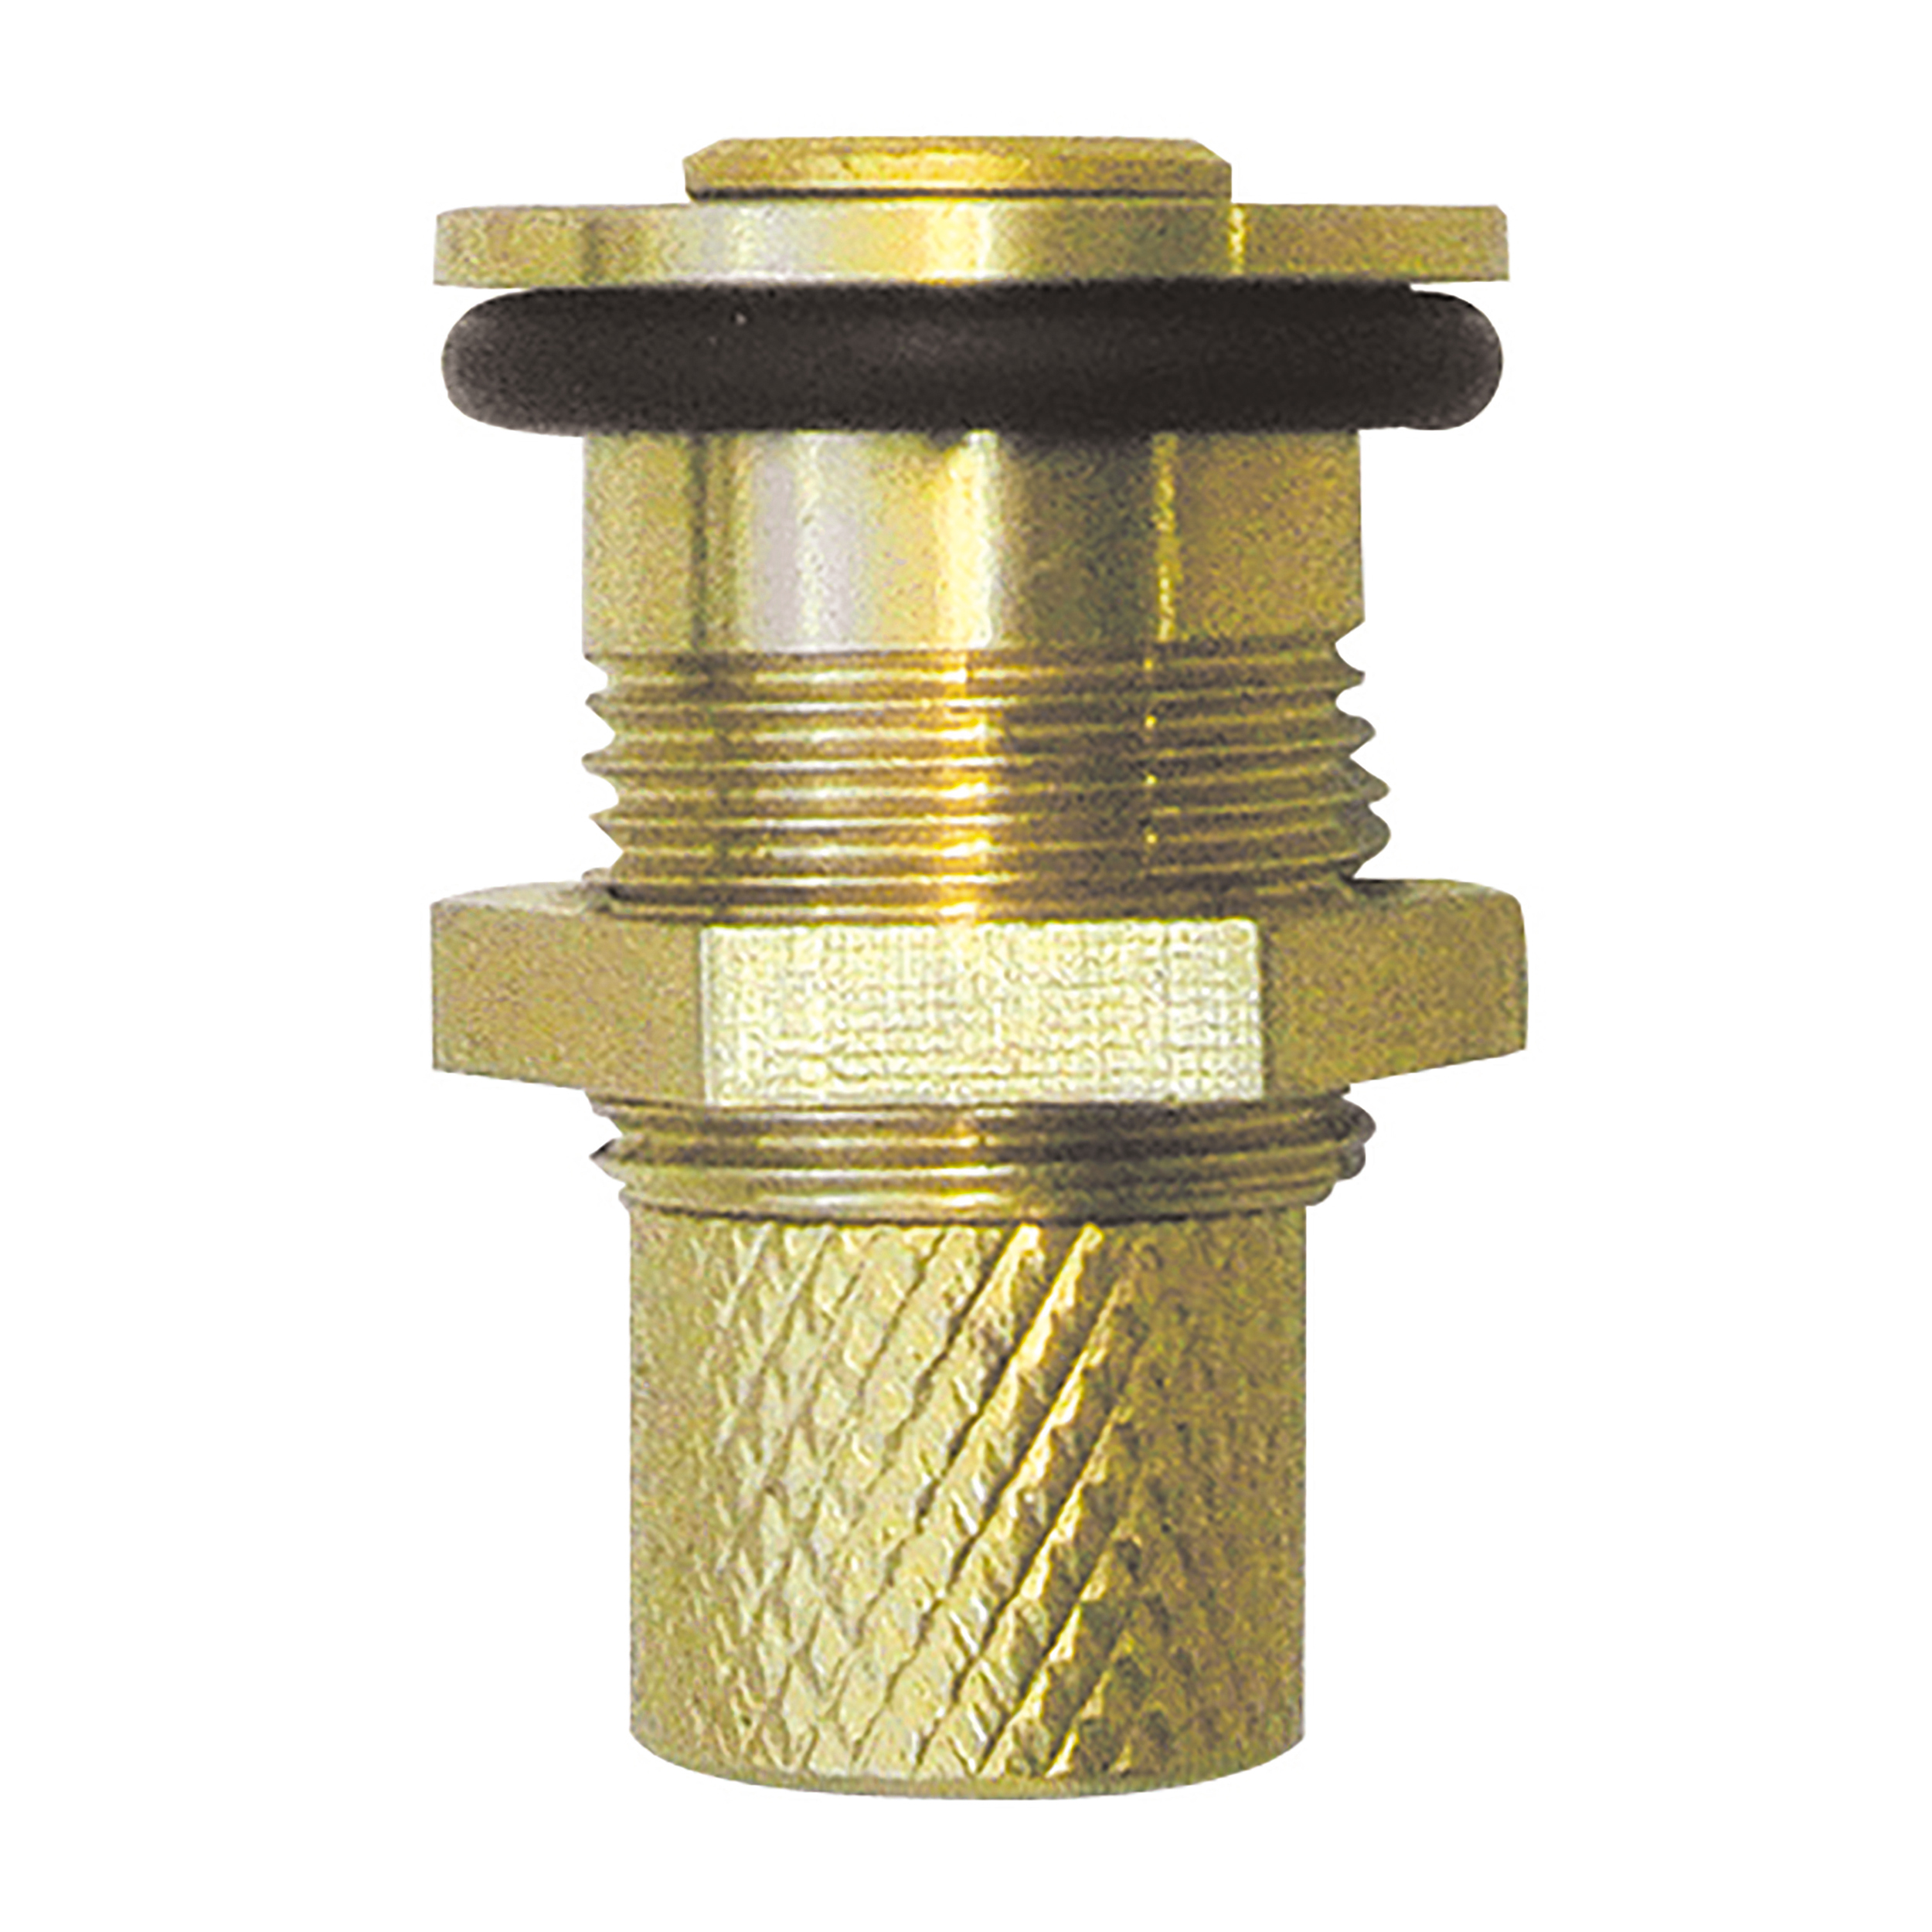 Semi-automatic drain valve, max. Ø19, length: 28 mm, connection: Ø14, condensate drain: DN 3.5, condensate outlet: G⅛ female